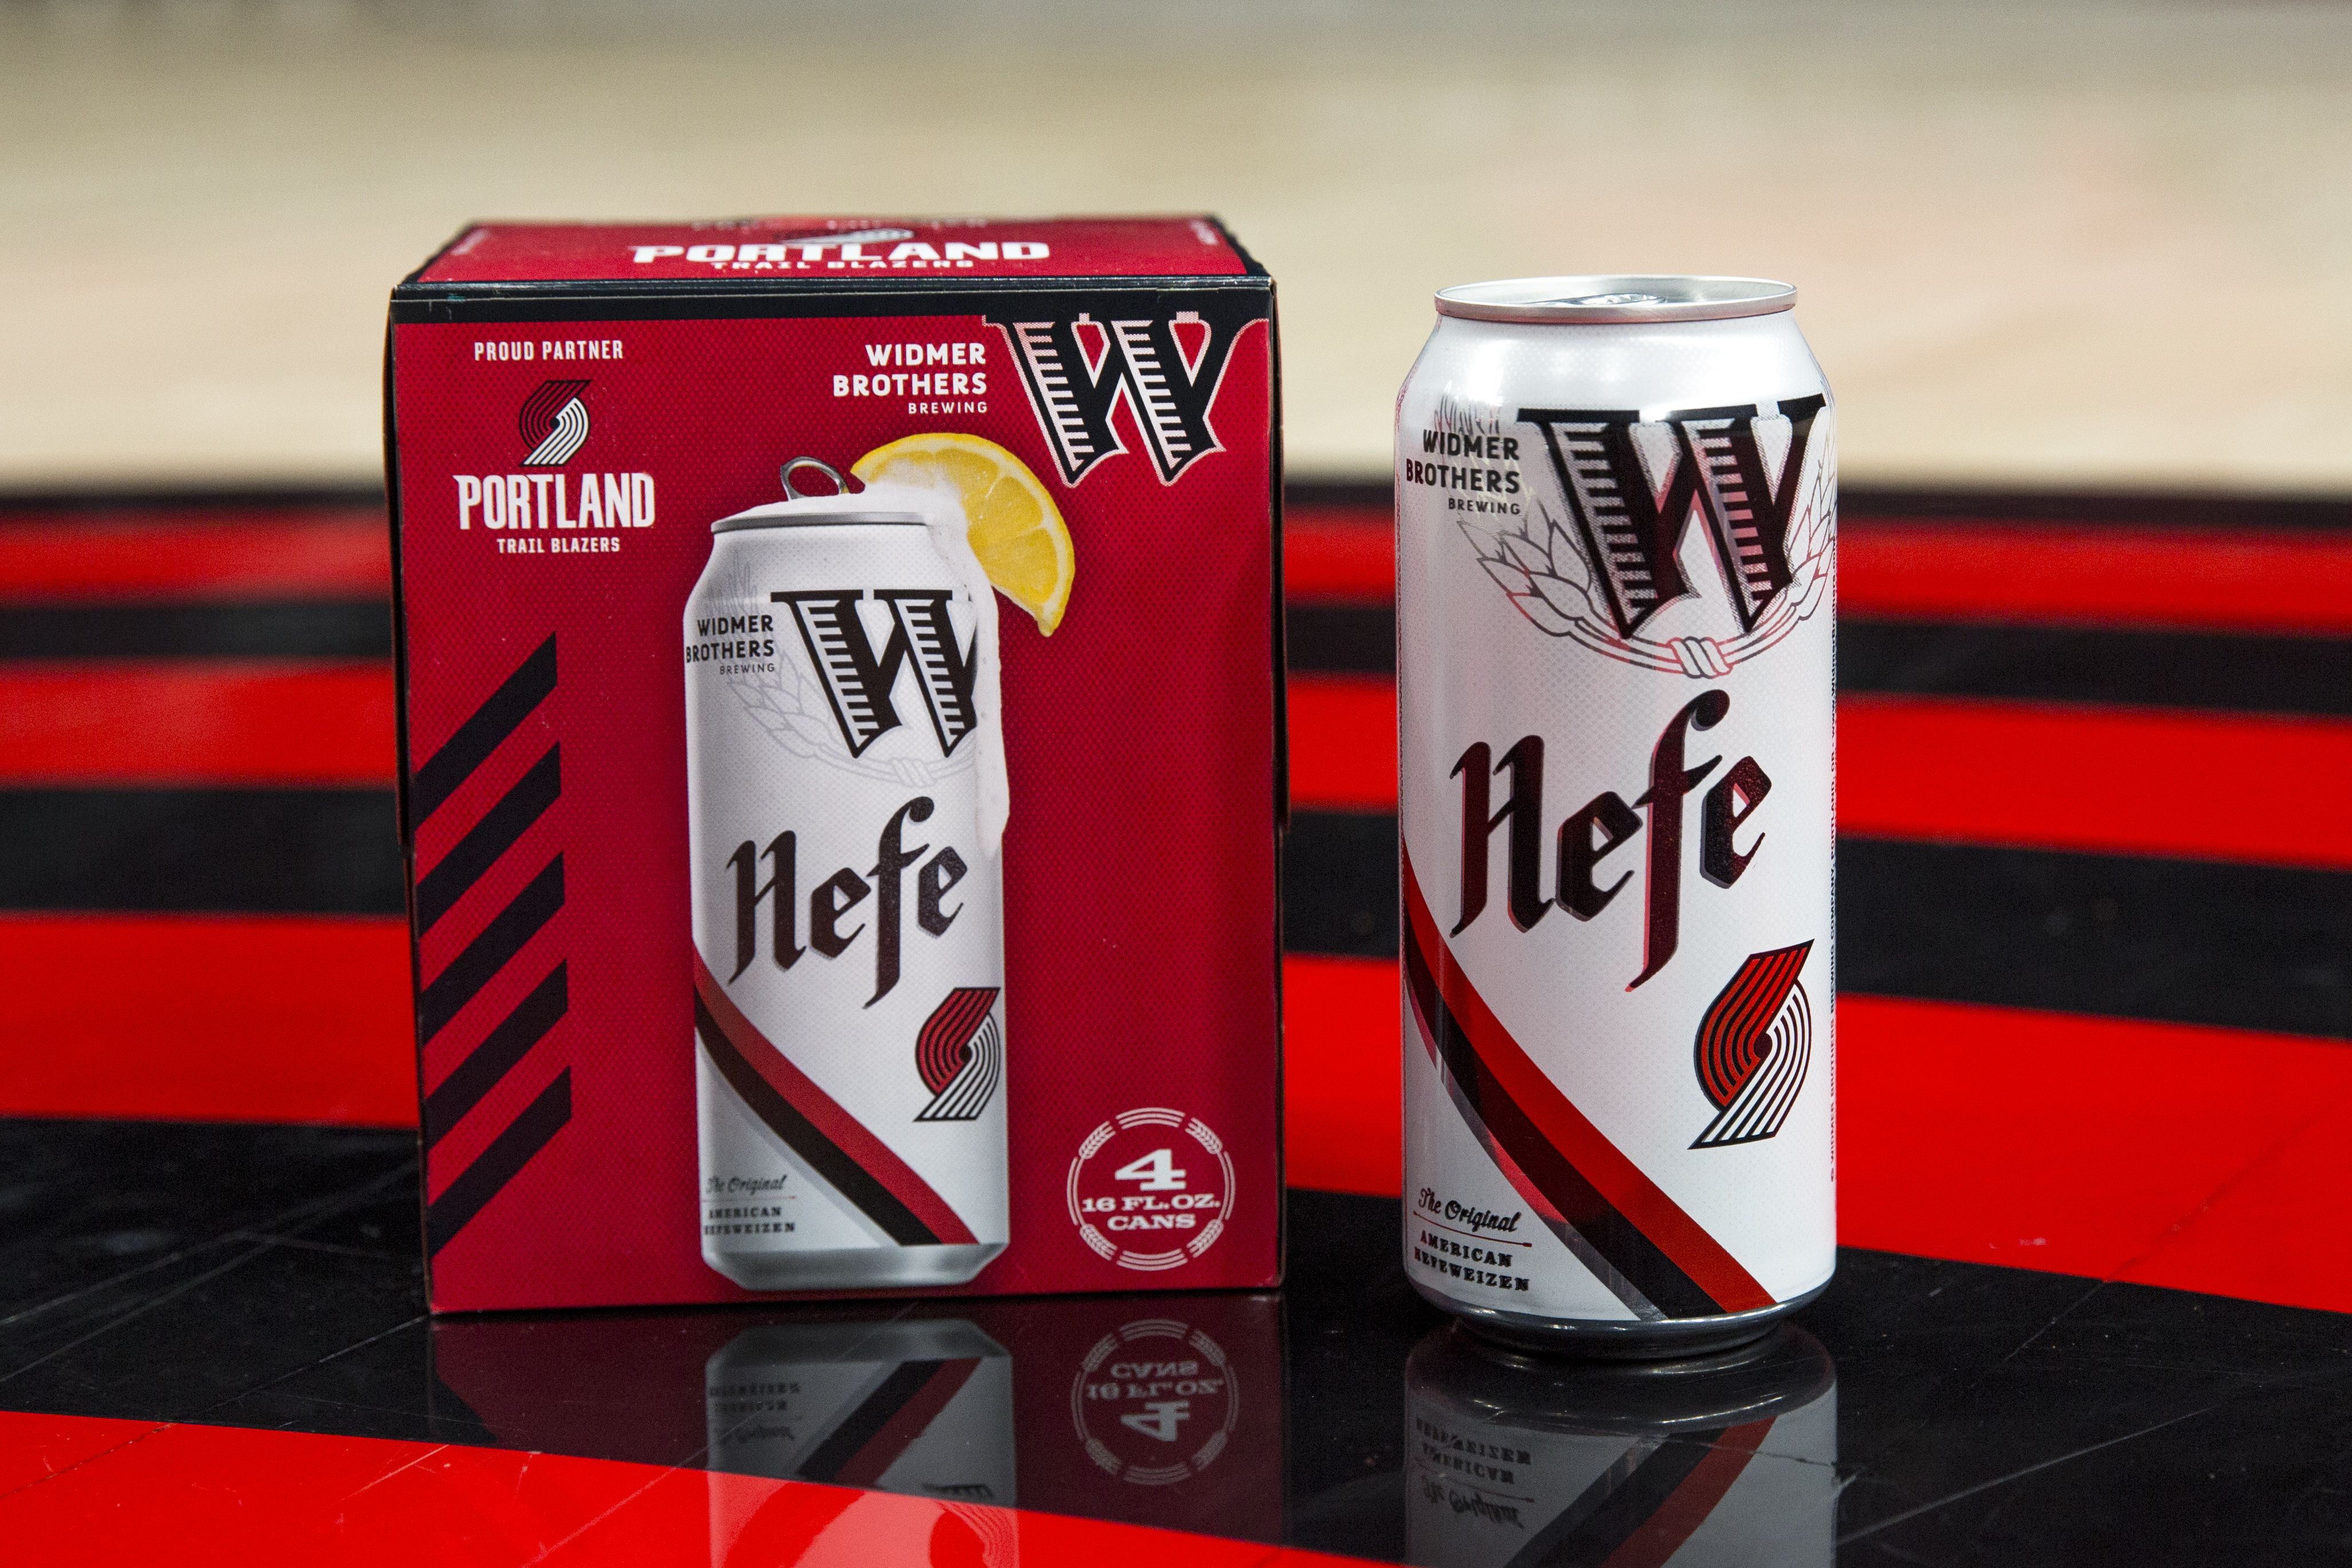 image of the Widmer Brothers and Portland Trail Blazers 4-pack courtesy of Widmer Brothers Brewing